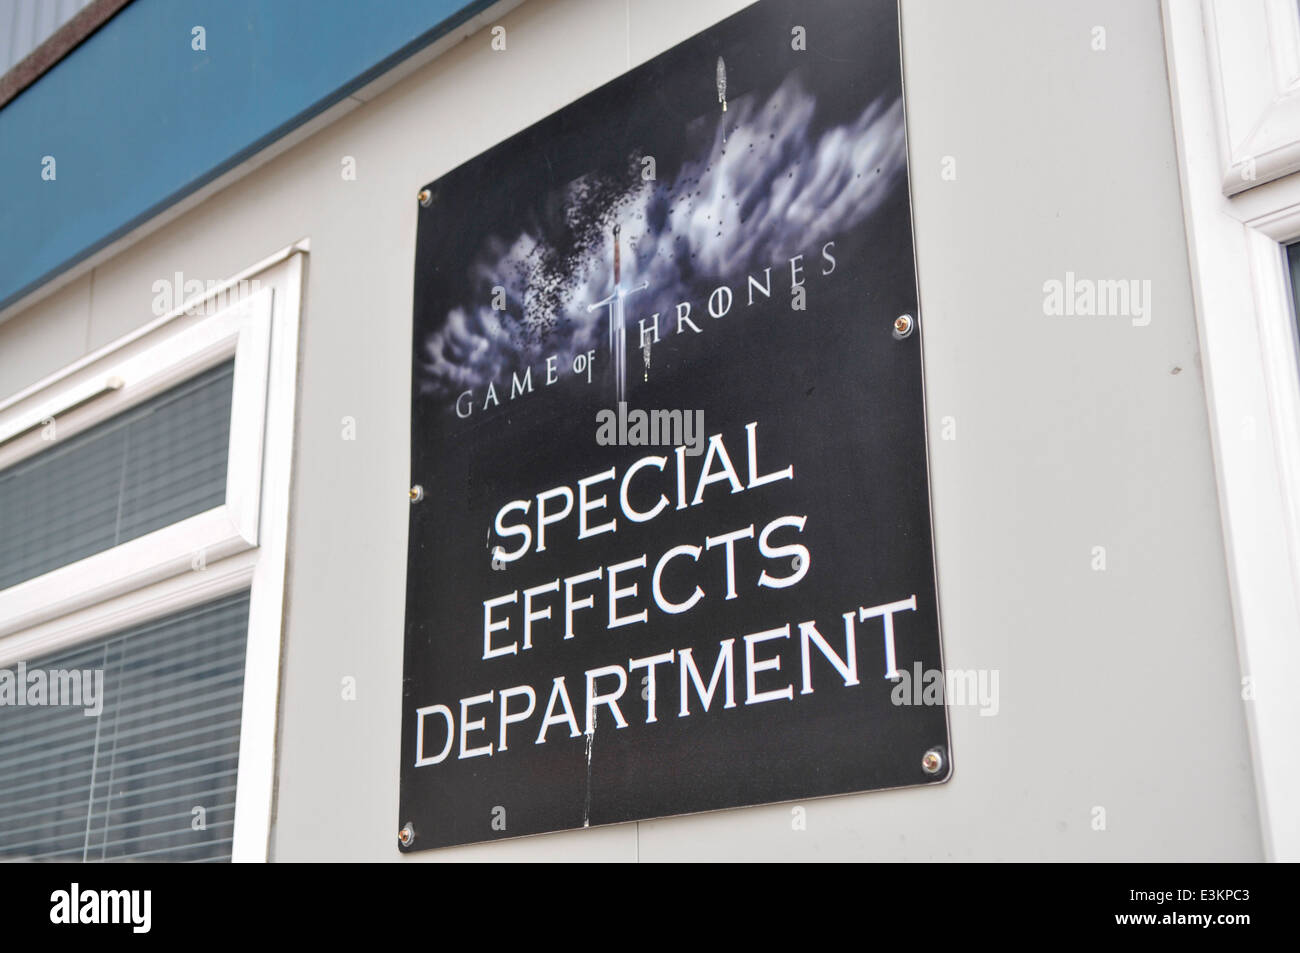 Special effects department for Game of Thrones, Belfast, Northern Ireland. Stock Photo